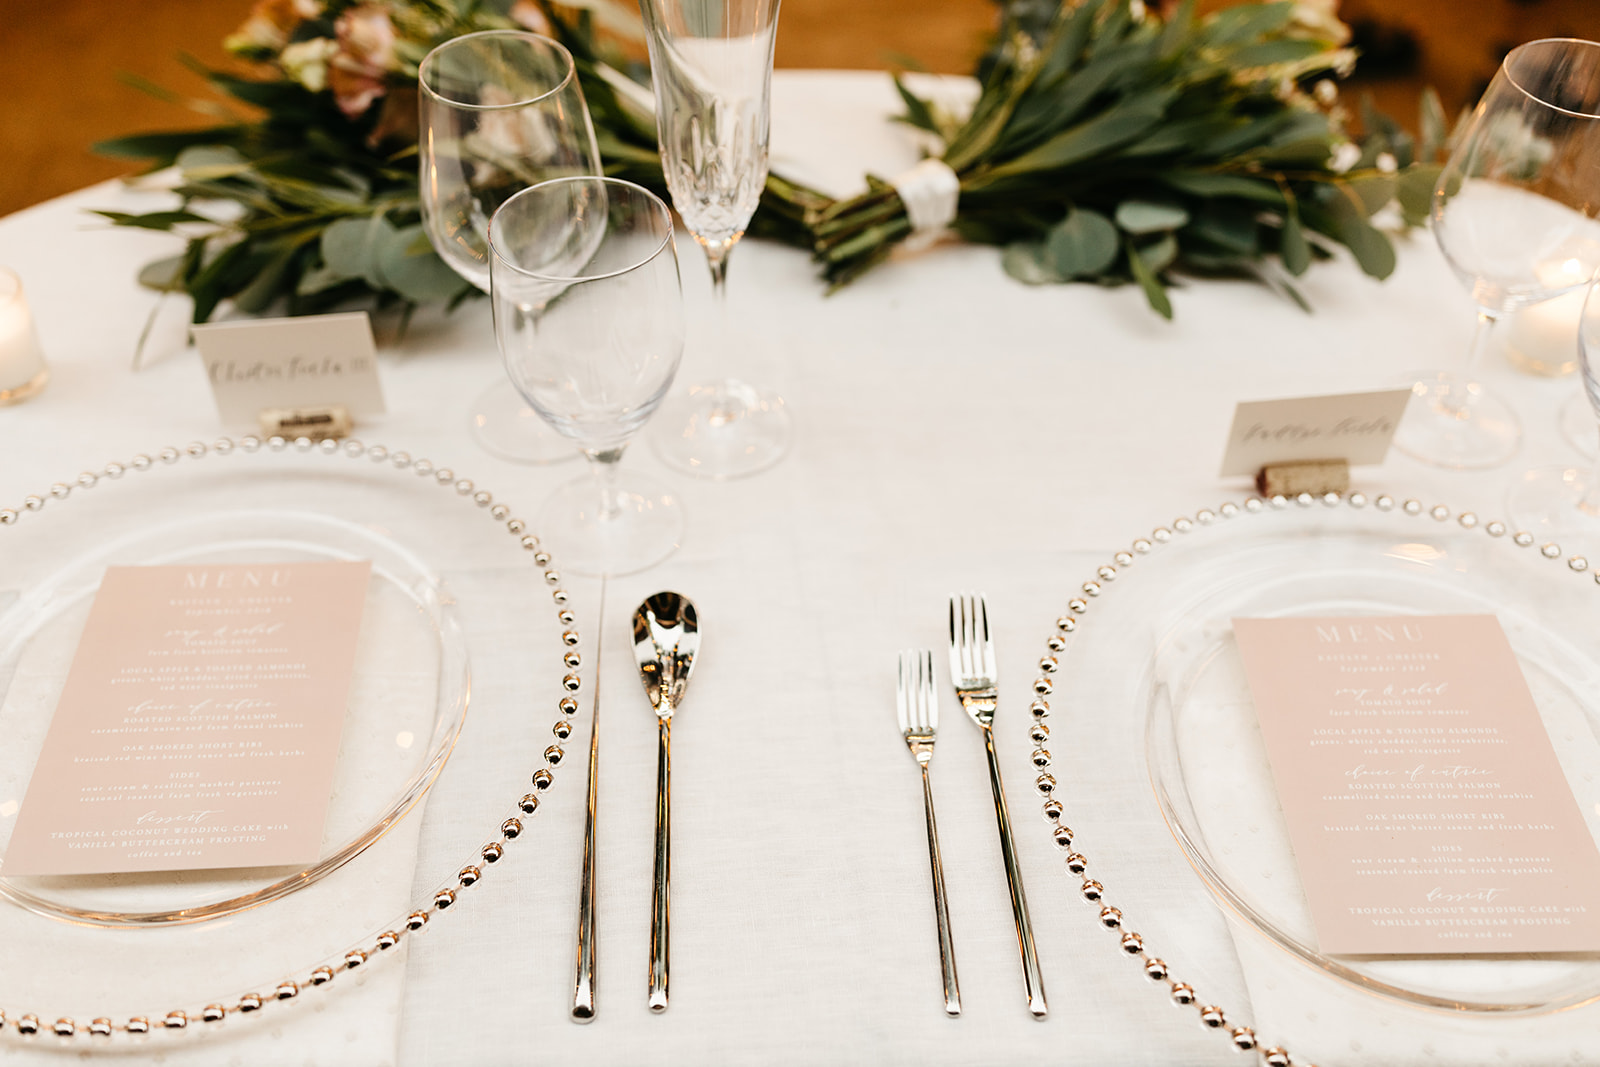 Intimate vineyard wedding reception at Roblar winery with blush pink menus and clear plates